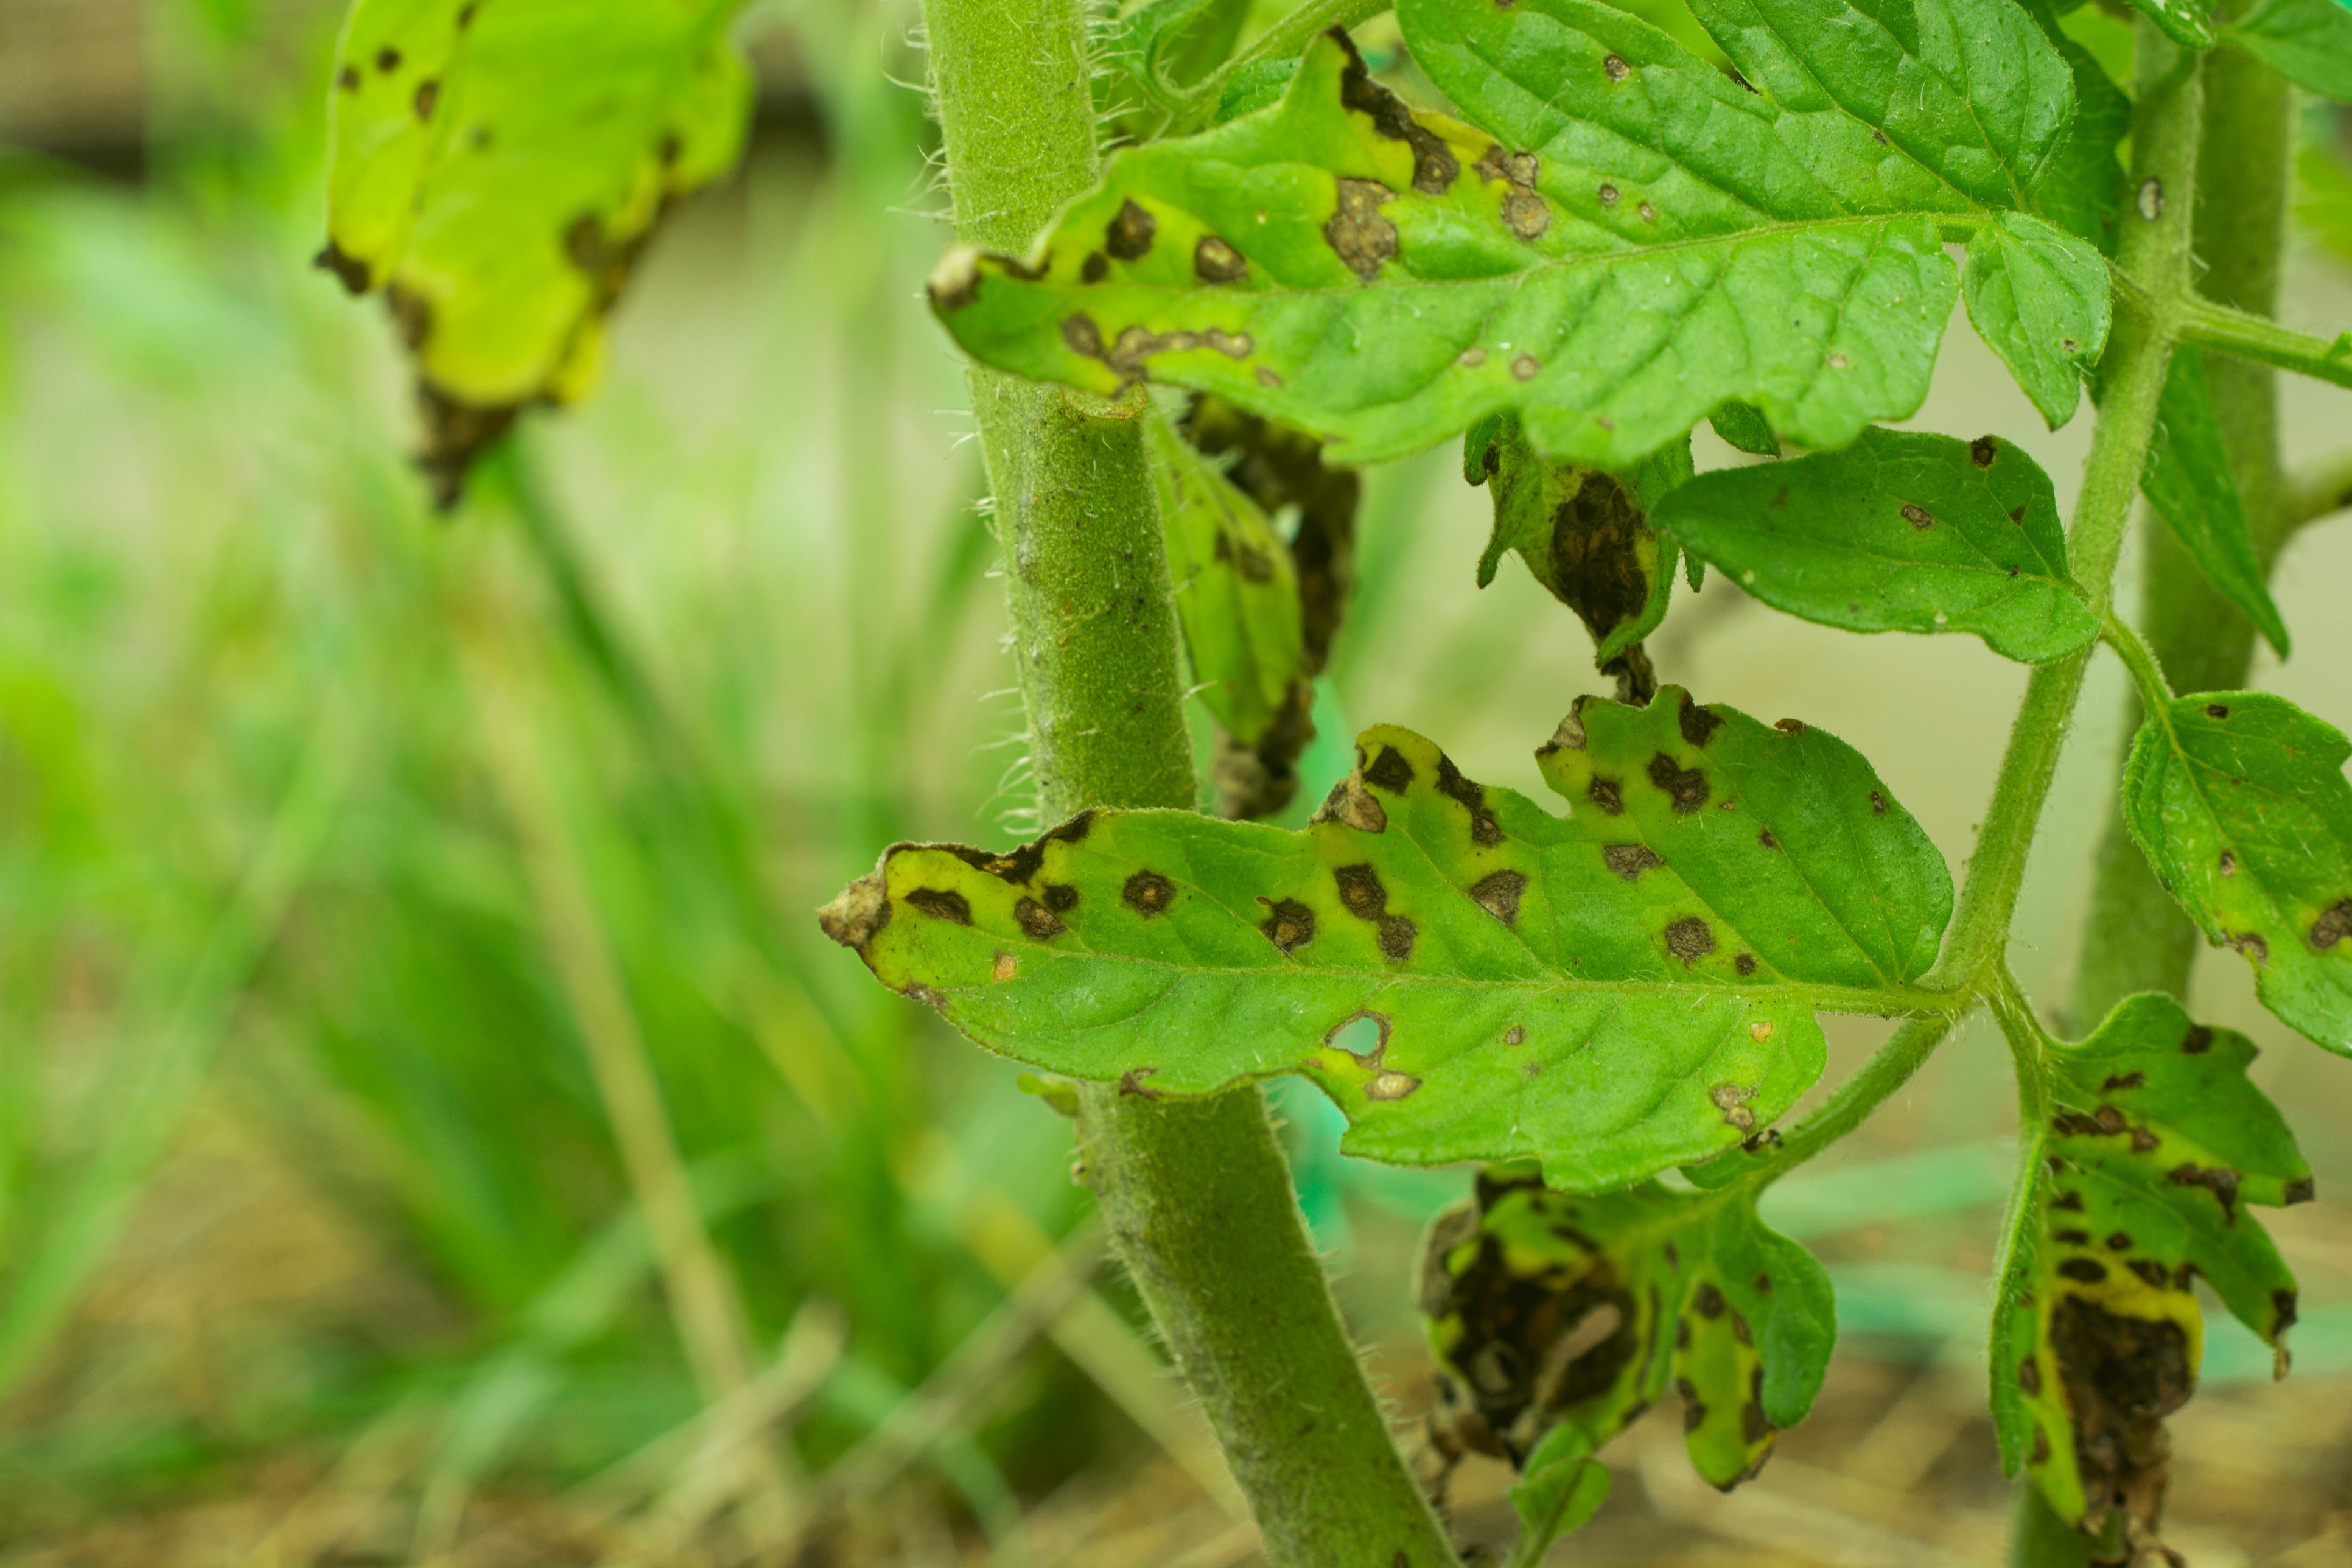 Tomato leaves affected by Septoria lycopersici fungus